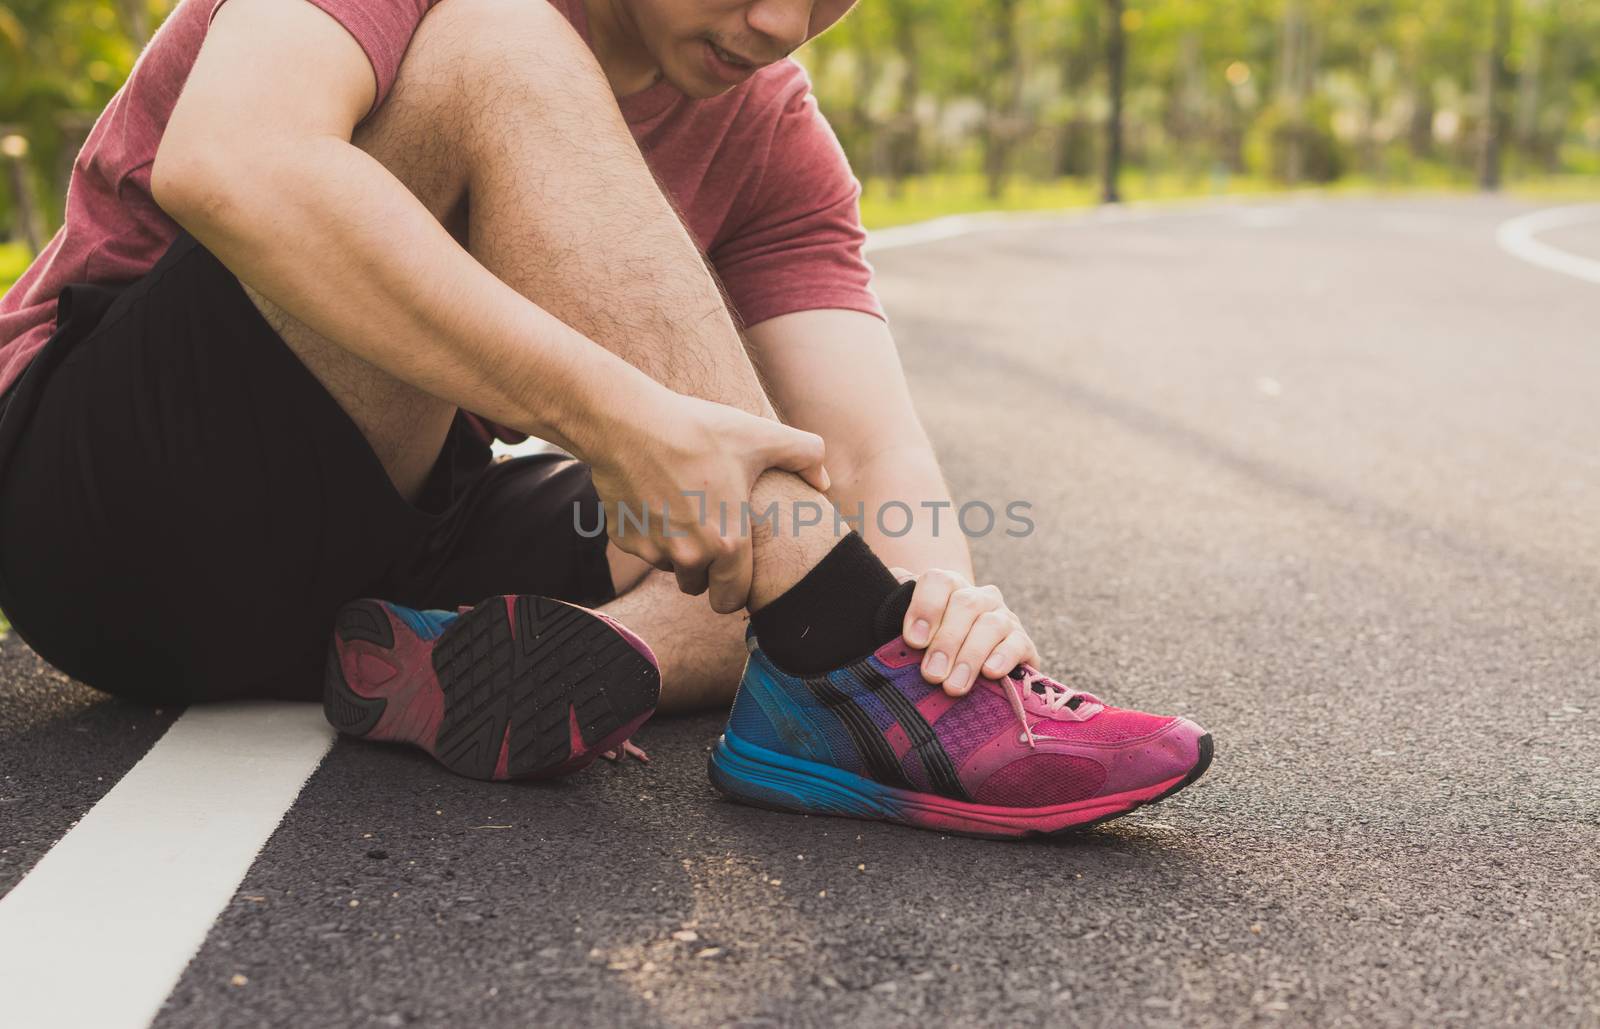 Ankle sprained. Young man suffering from an ankle injury while running at park. Healthcare and sport concept.